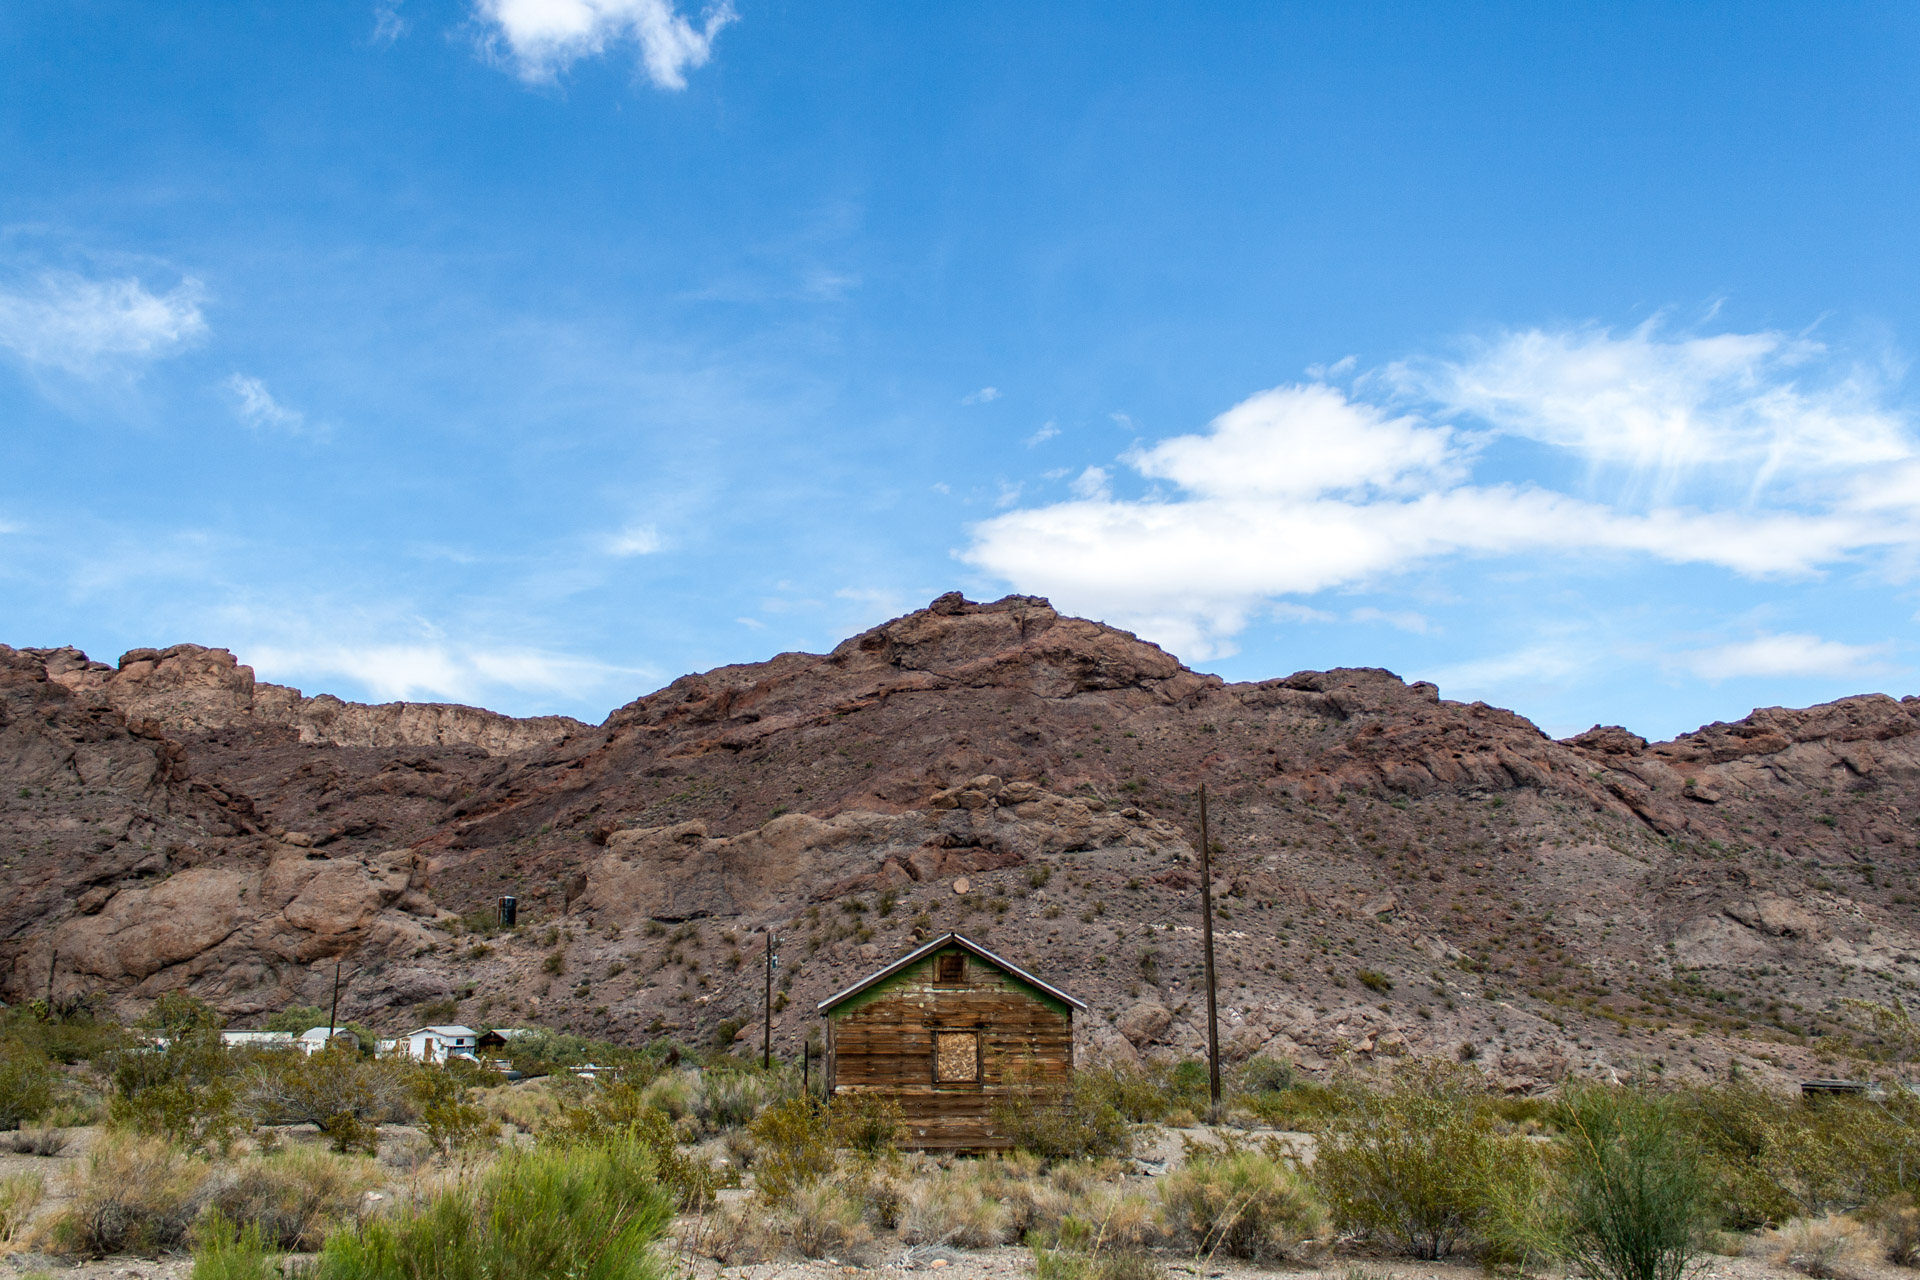 Nelson, Nevada - A Weathered Mining Town House (straight far)